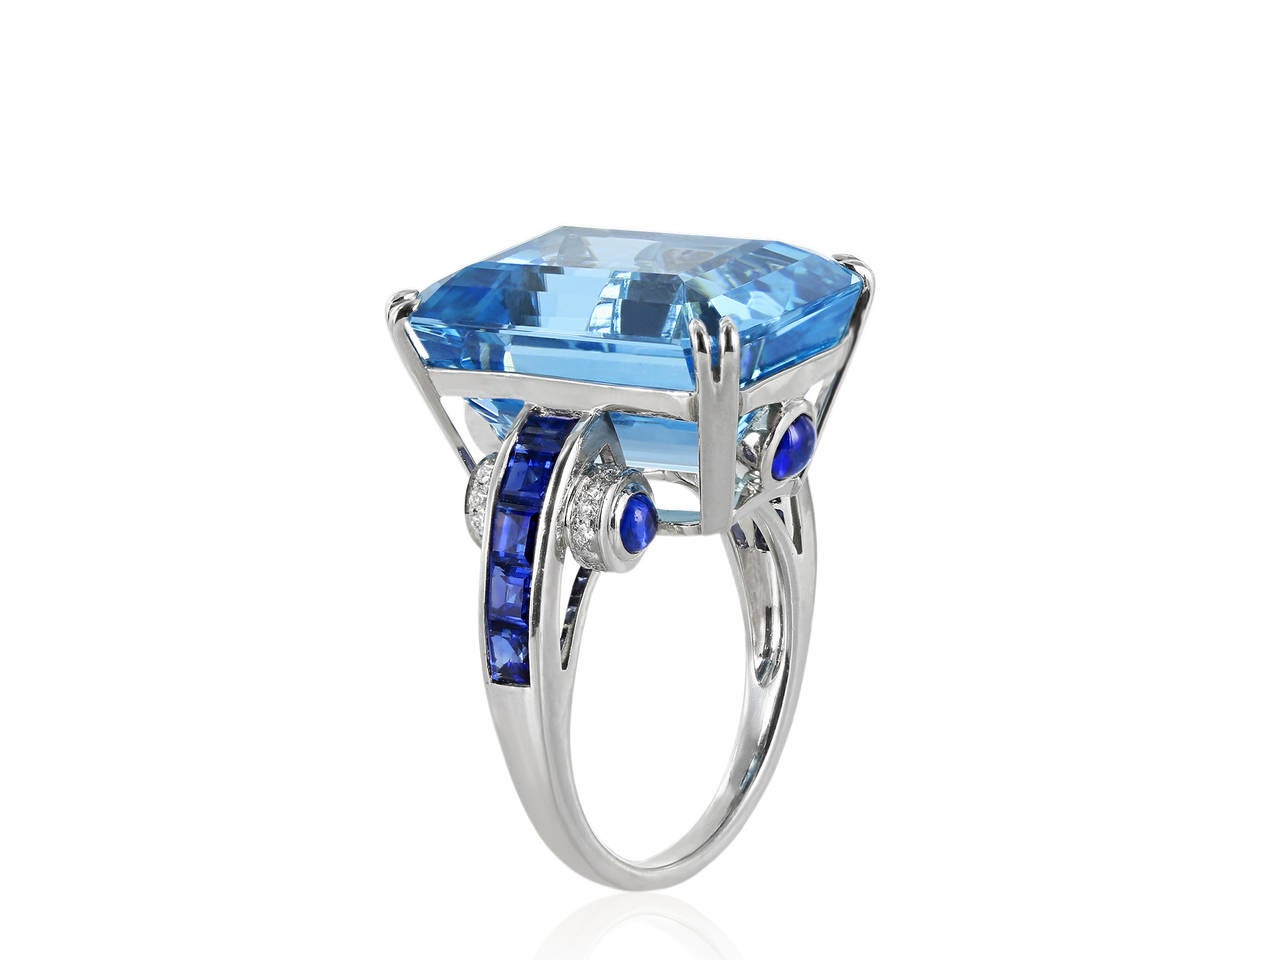 Estate platinum ring consisting of a 1 emerald cut aquamarine weighing approximately 18 carats flanked by 10 French cut sapphires with 6 cabochon cut sapphires accenting the under gallery and full cut diamonds.